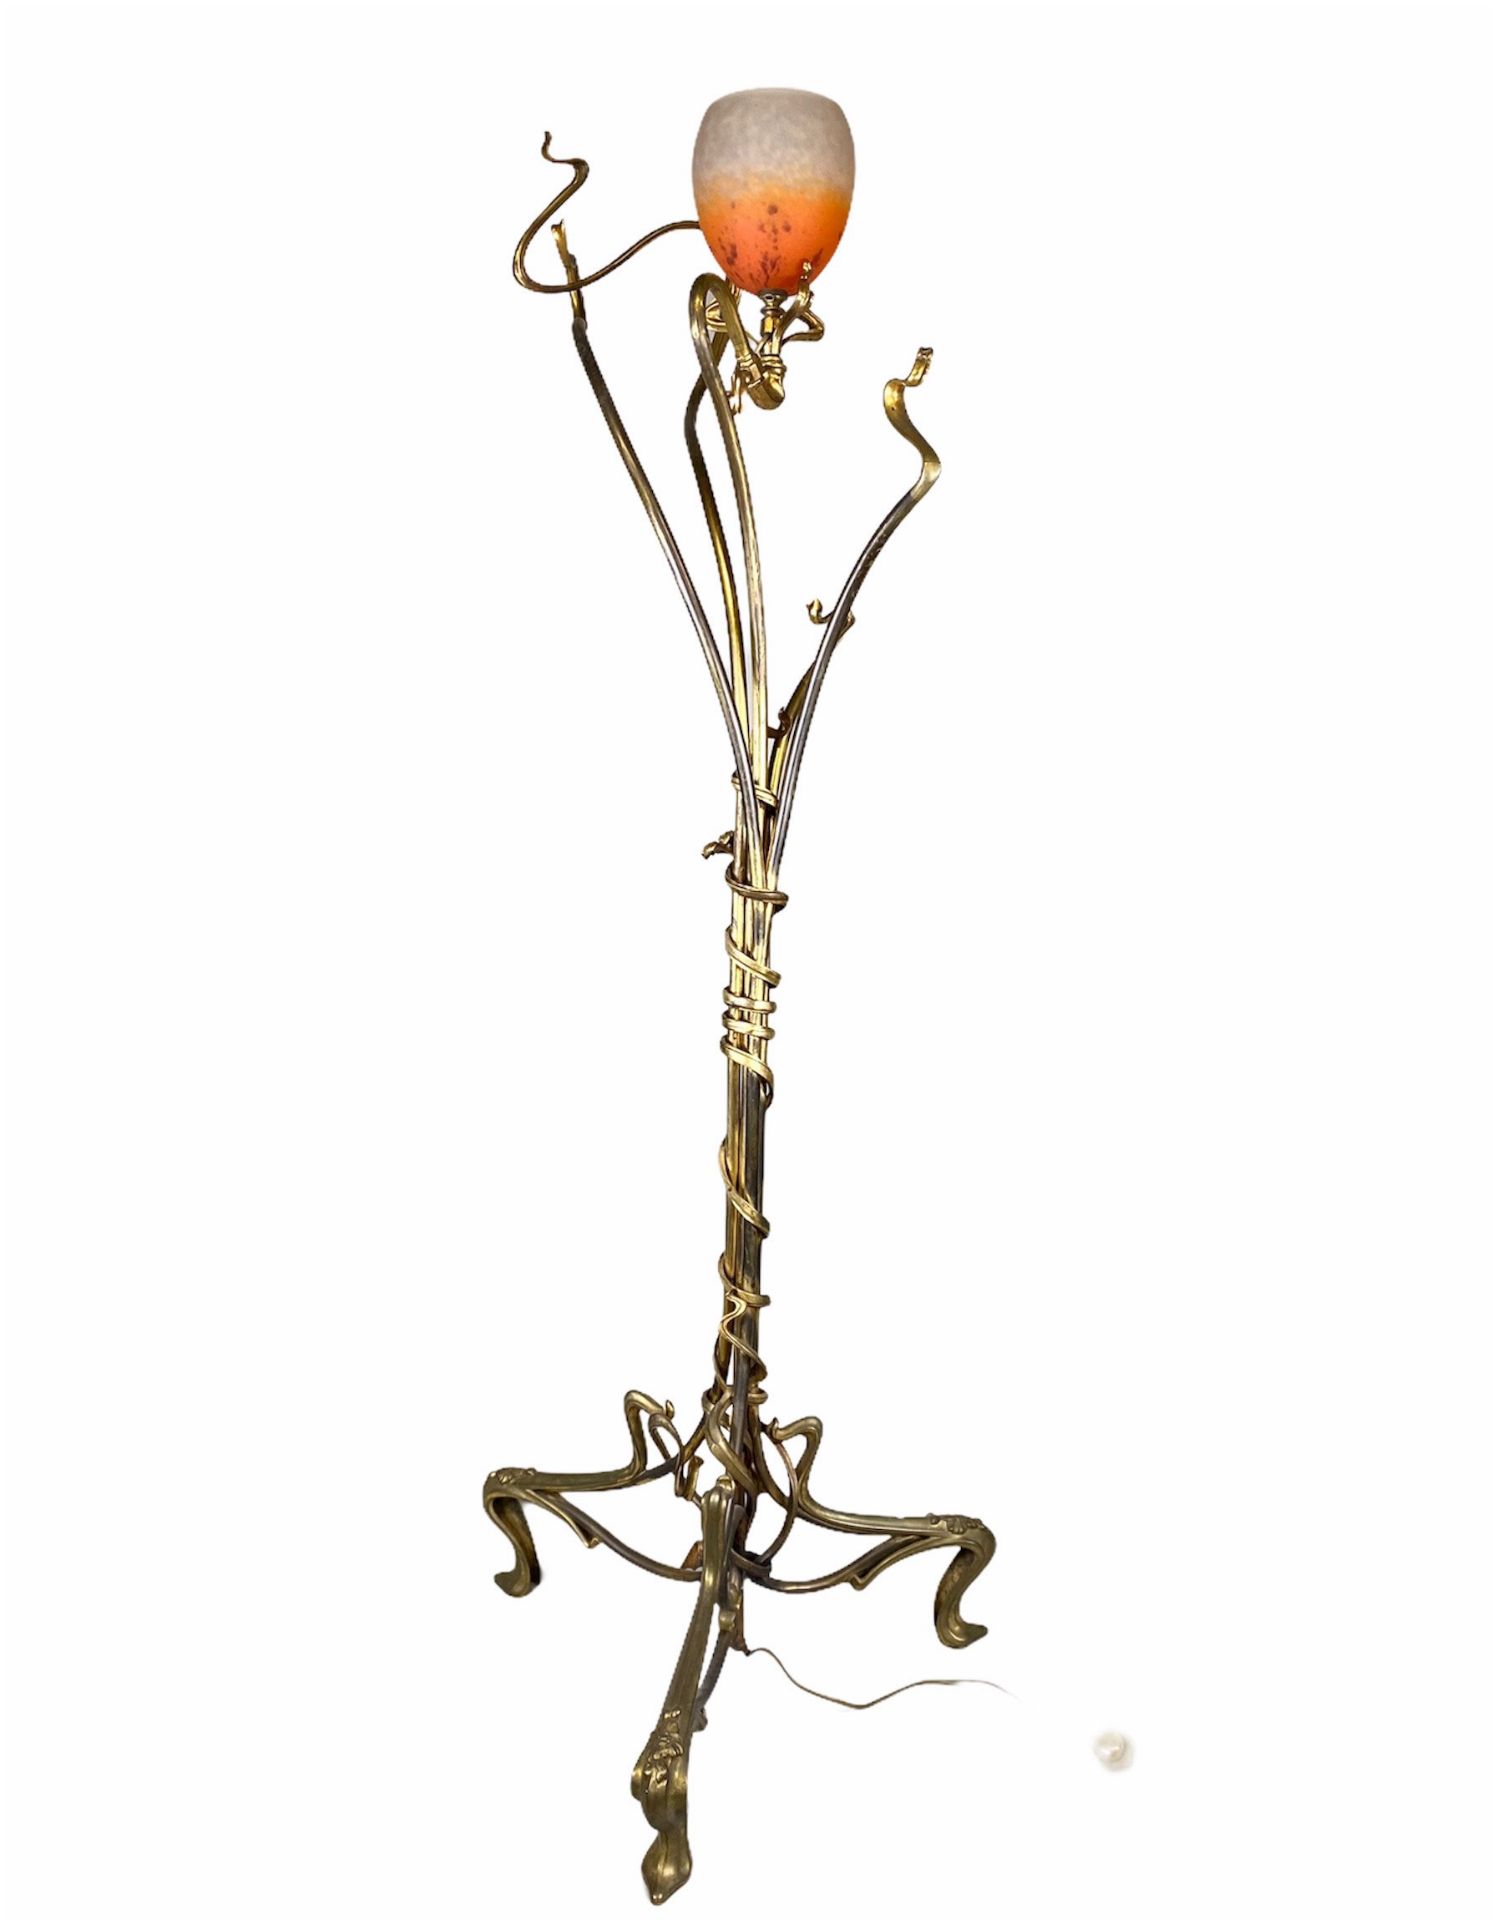 Victor Horta (attributed to) Imposing living room lamp with vegetable base in bronze. "added bobeche - Image 5 of 7